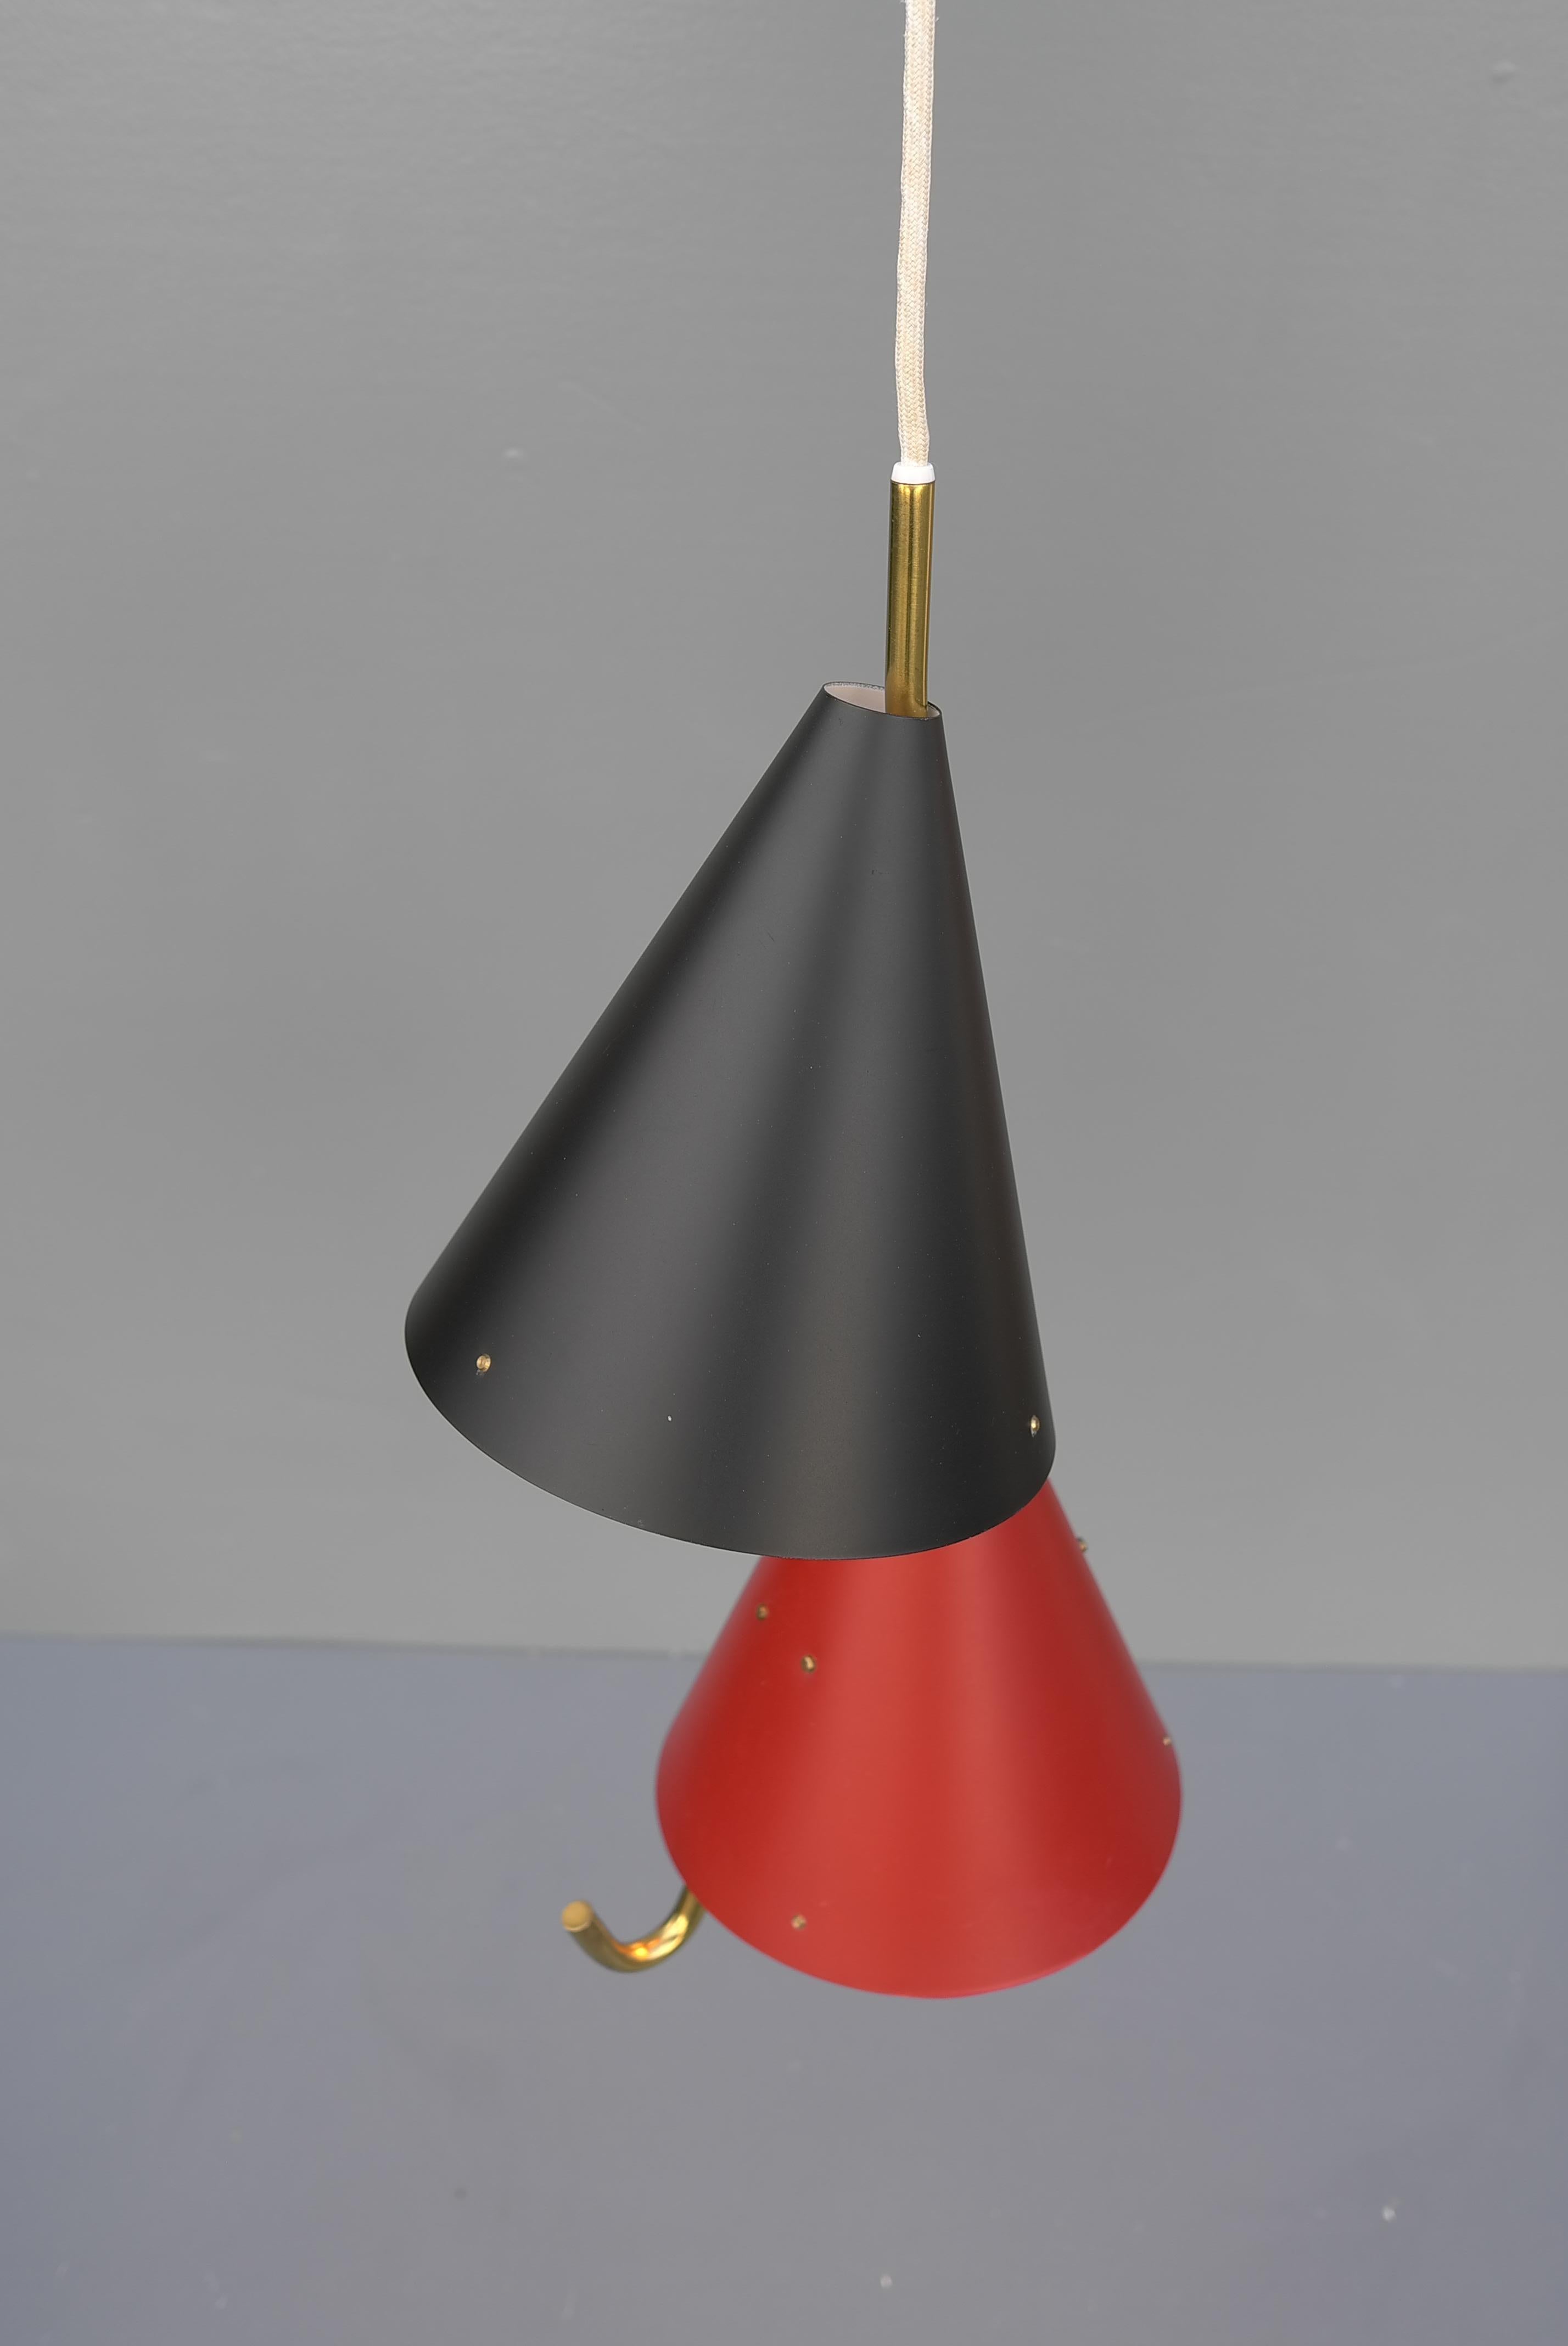 Bent Karlby Red and Black New Old Stock Lyfa Pendant Lamp, Denmark, 1955 For Sale 3